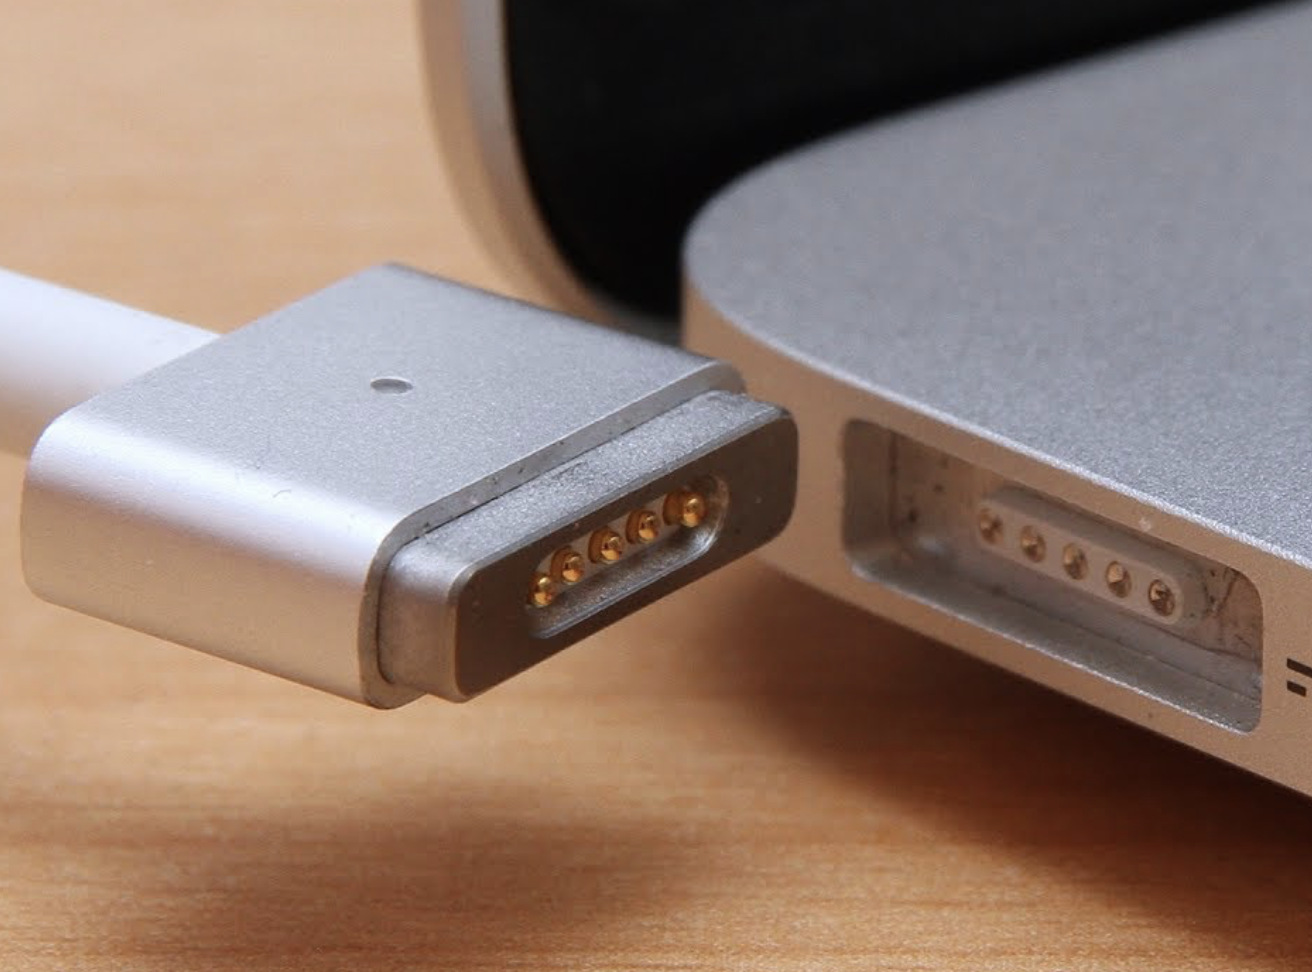 chargeur magsafe